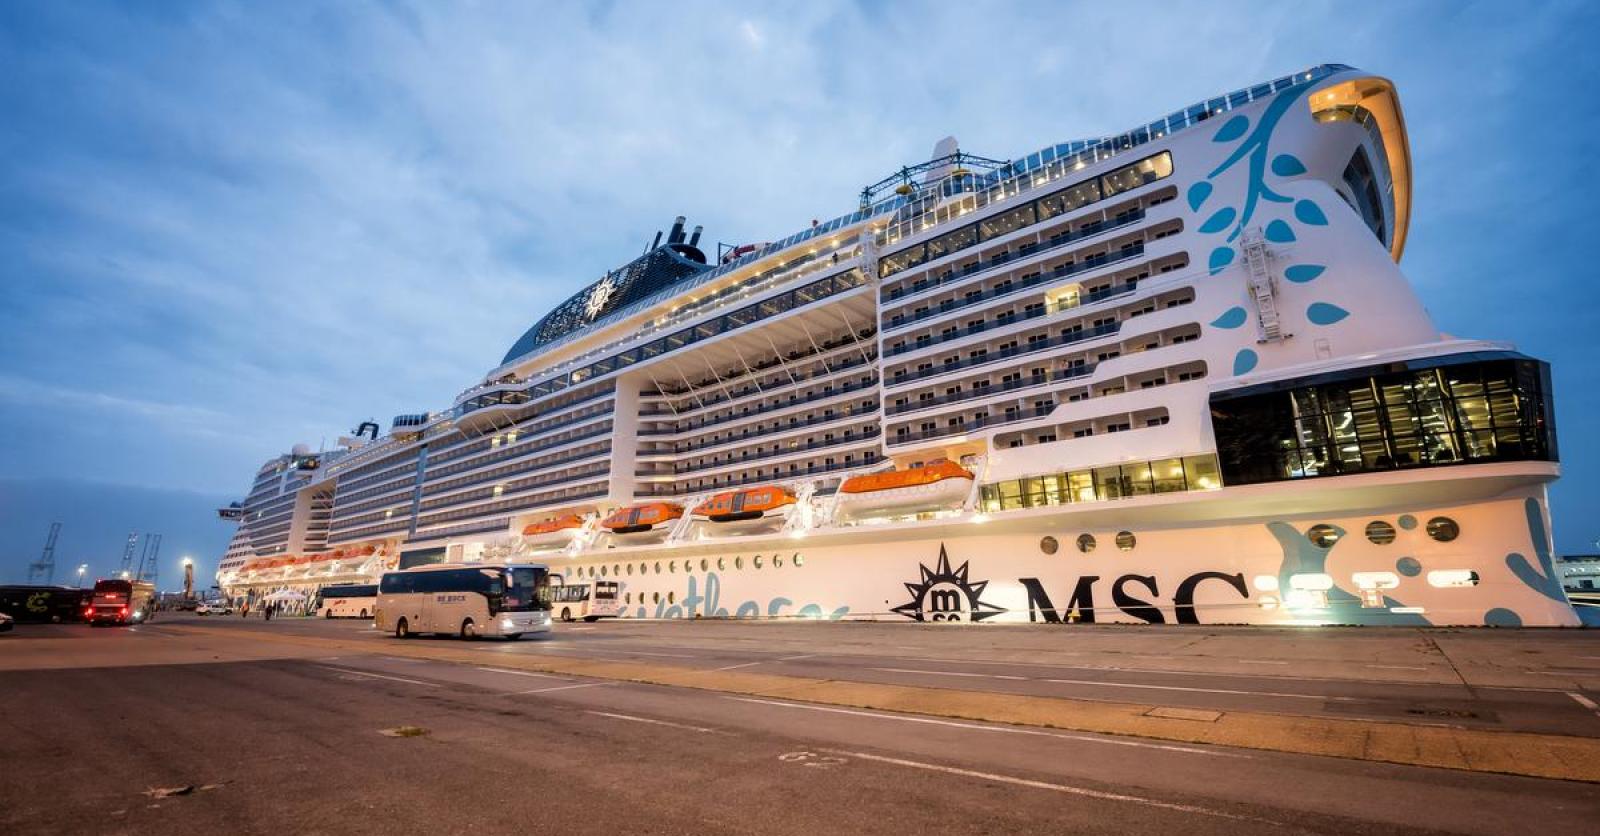 MSC Euribia: The world’s most energy efficient cruise ship docks in Zeebrugge